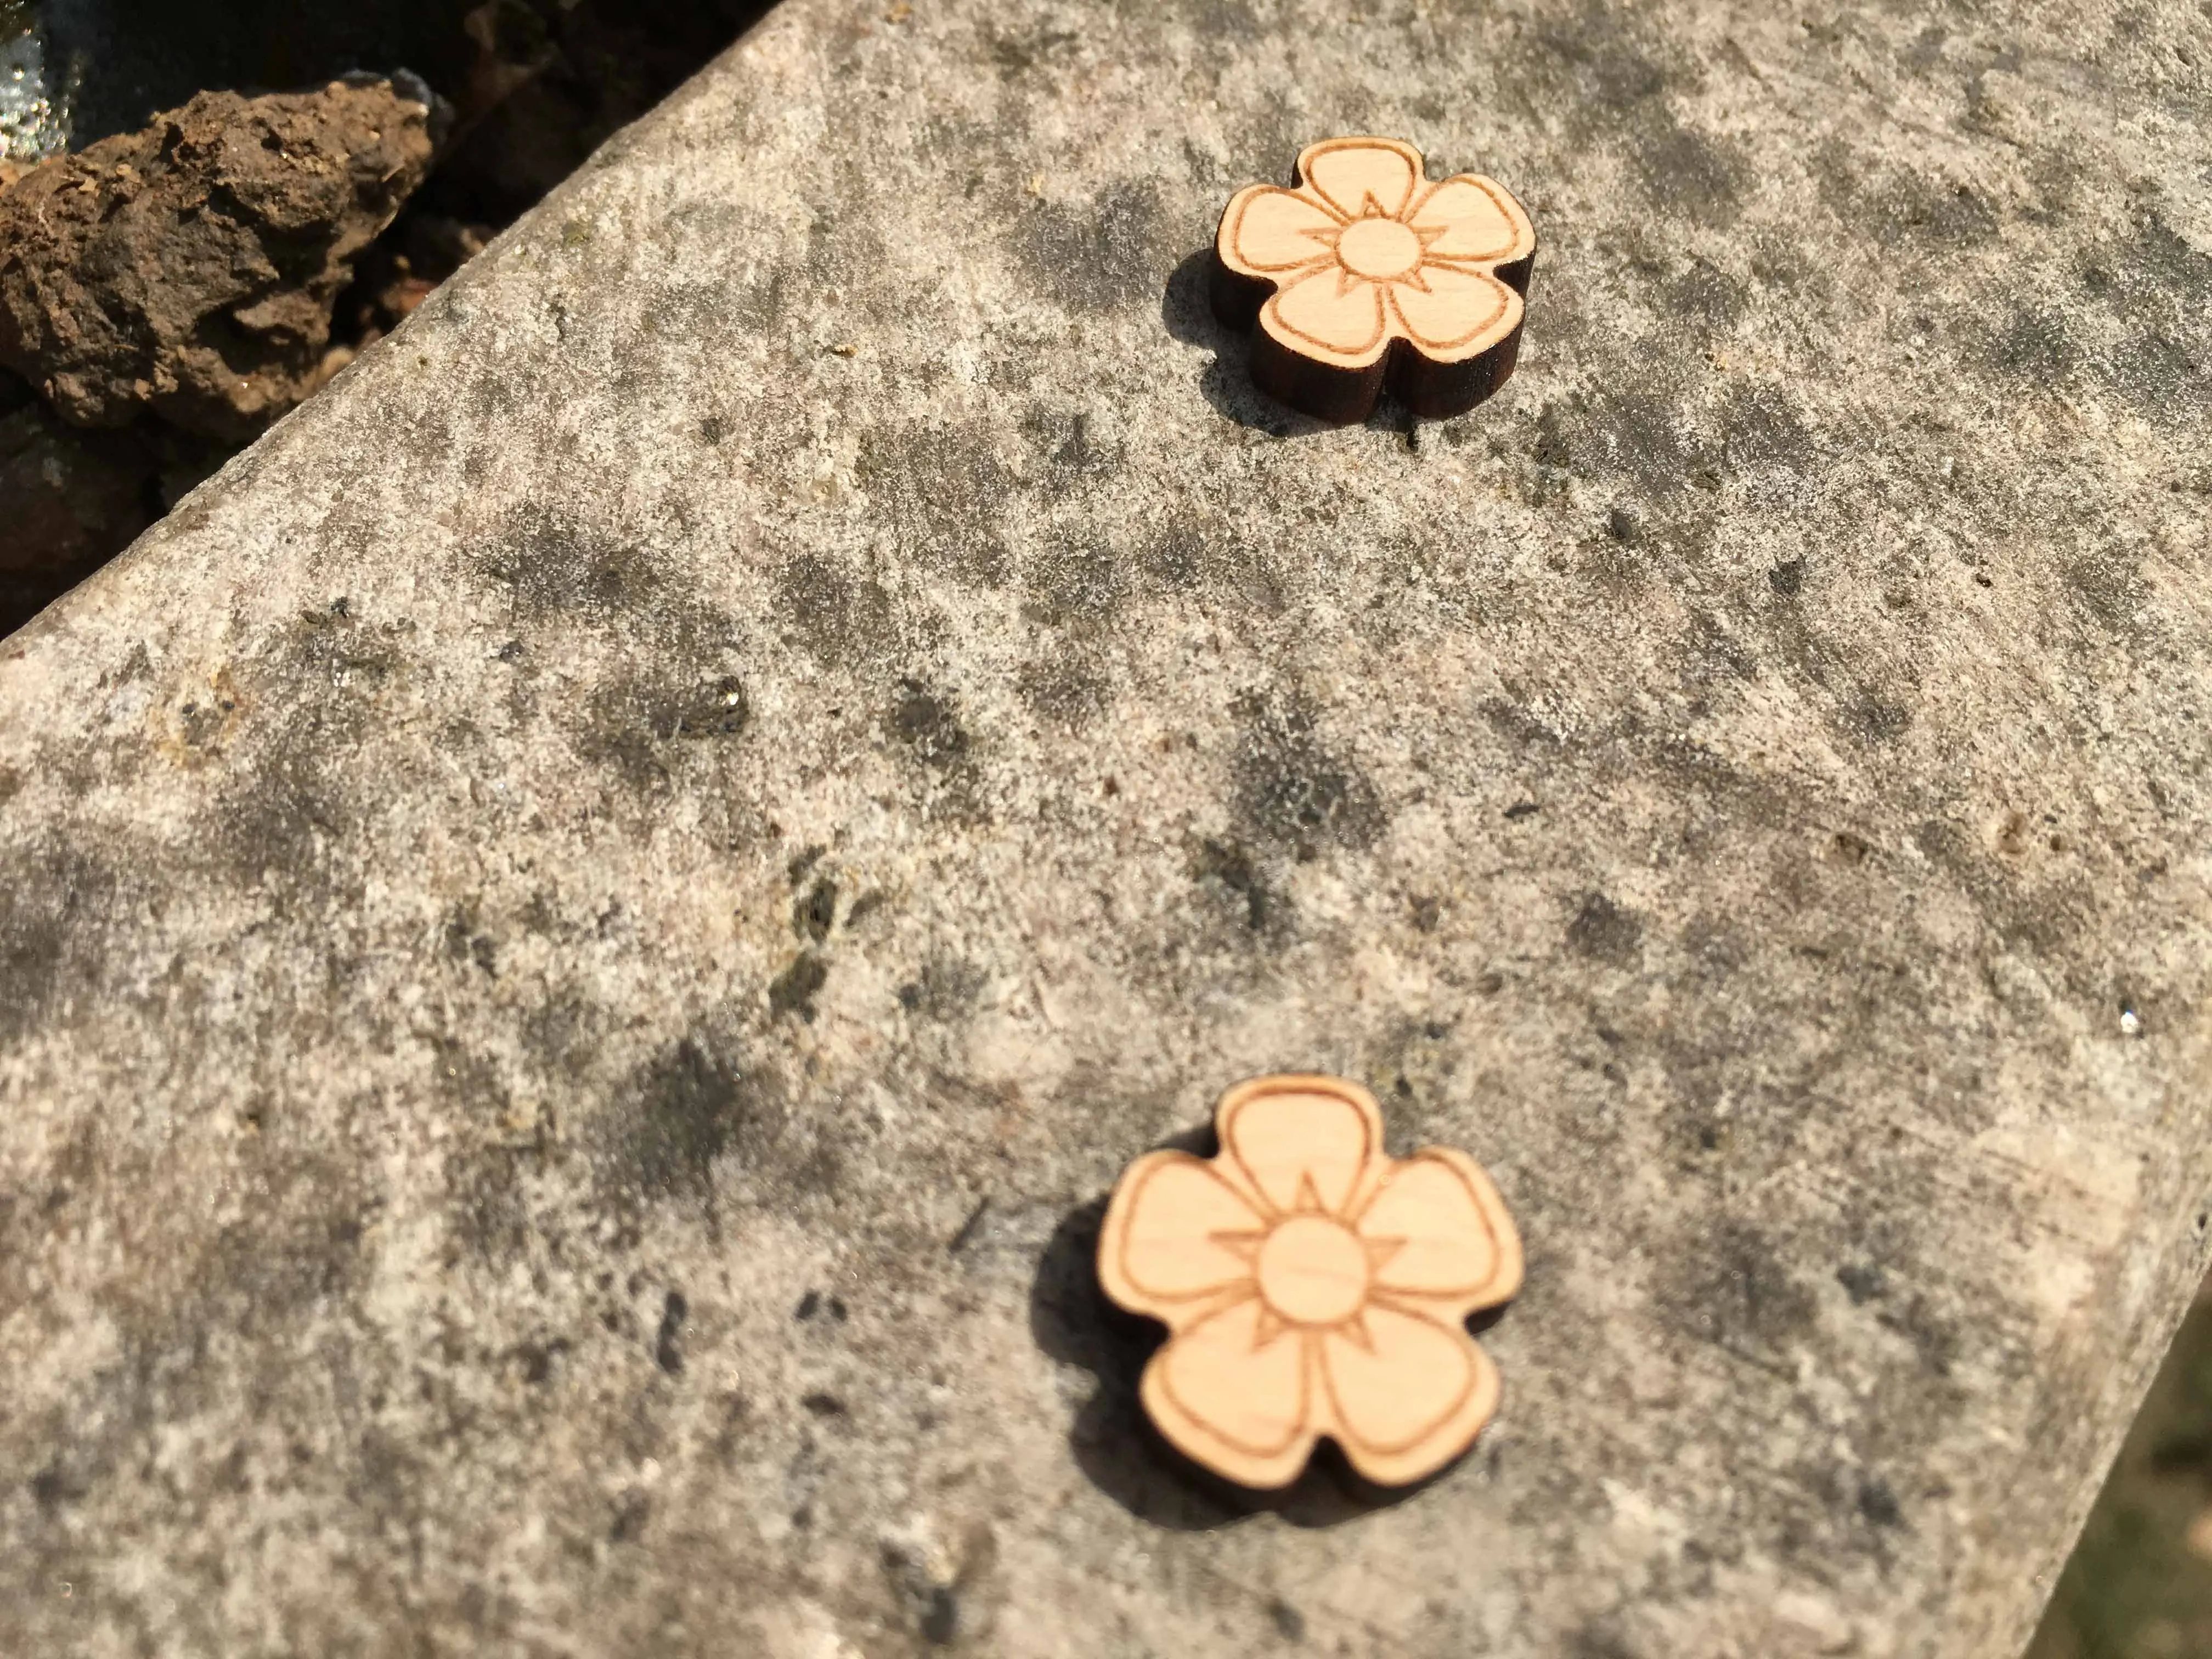 Natural Style Laser Engraved Round Flowers Earrings Plant Stud Blossom Wooden Earring X 1 Pair |